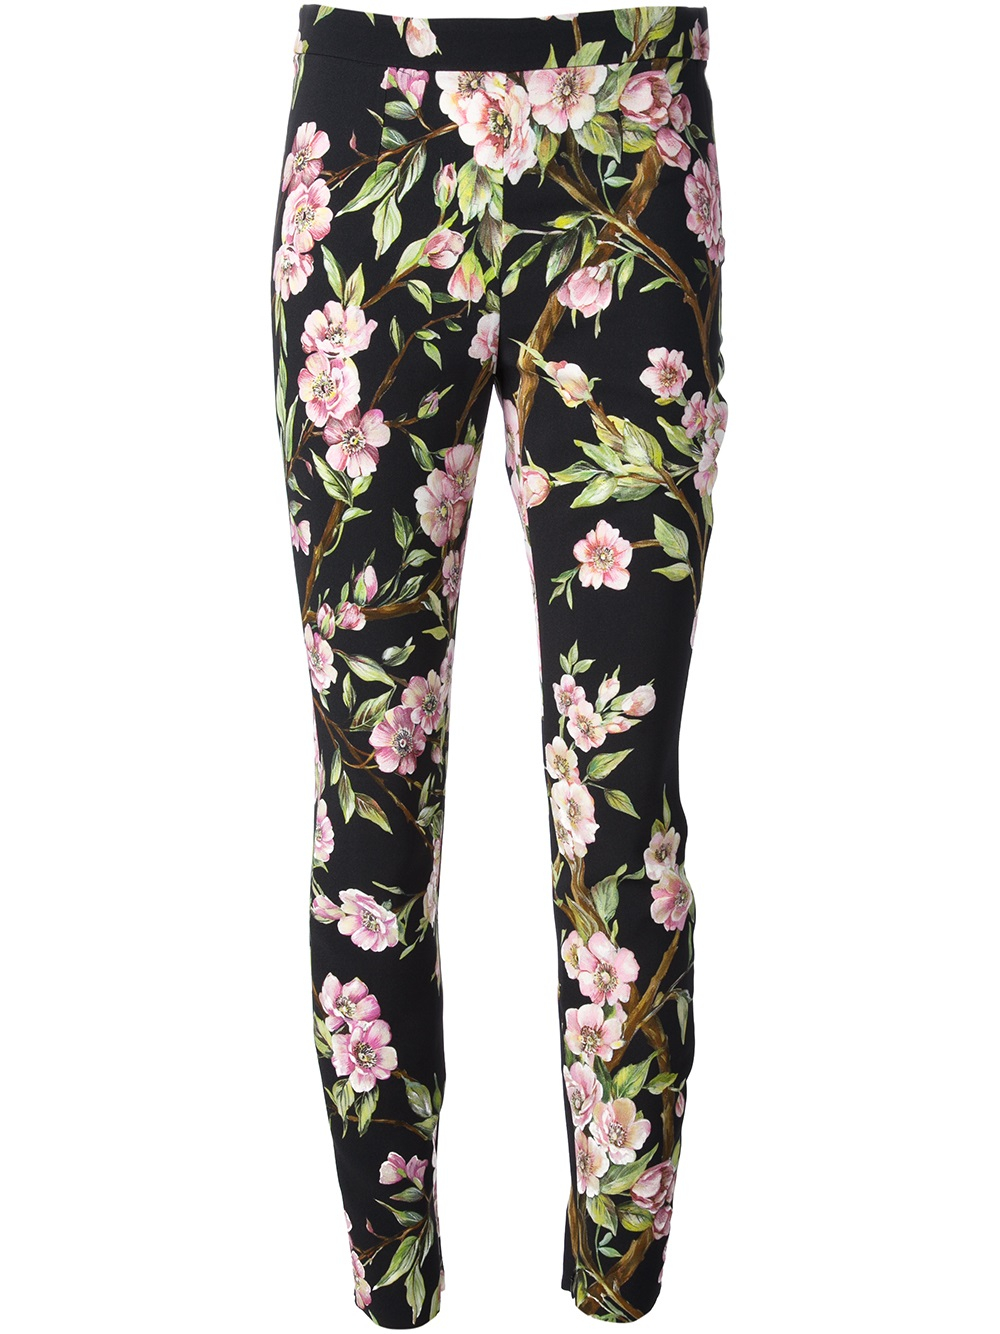 Dolce & gabbana Floral Printed Trouser in Black | Lyst